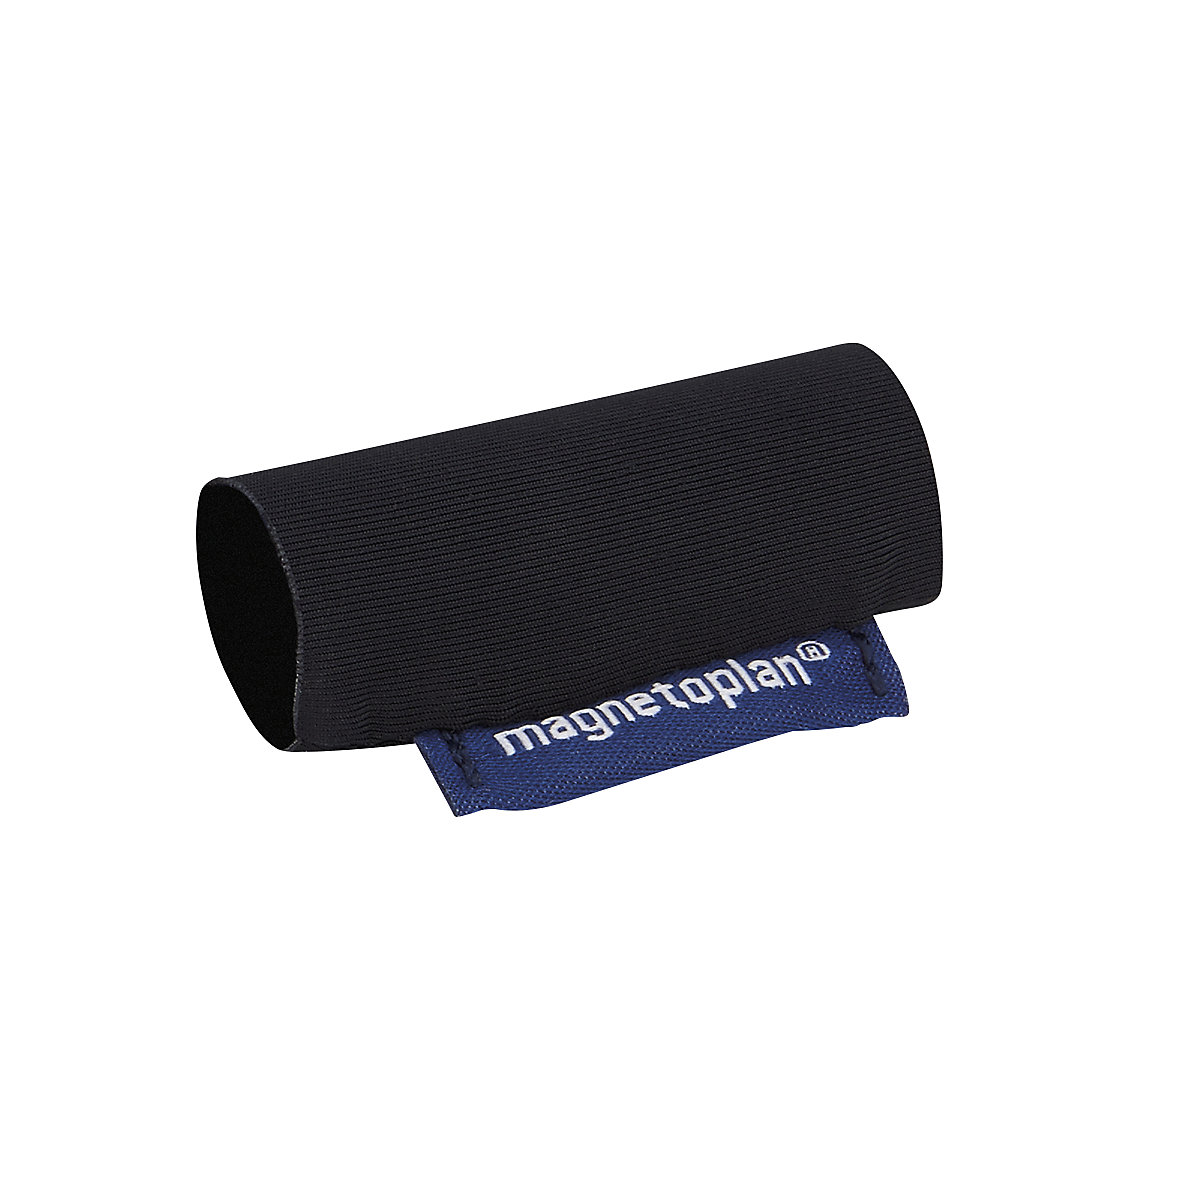 Porte-stylo magnétique magnetoSleeves - magnetoplan